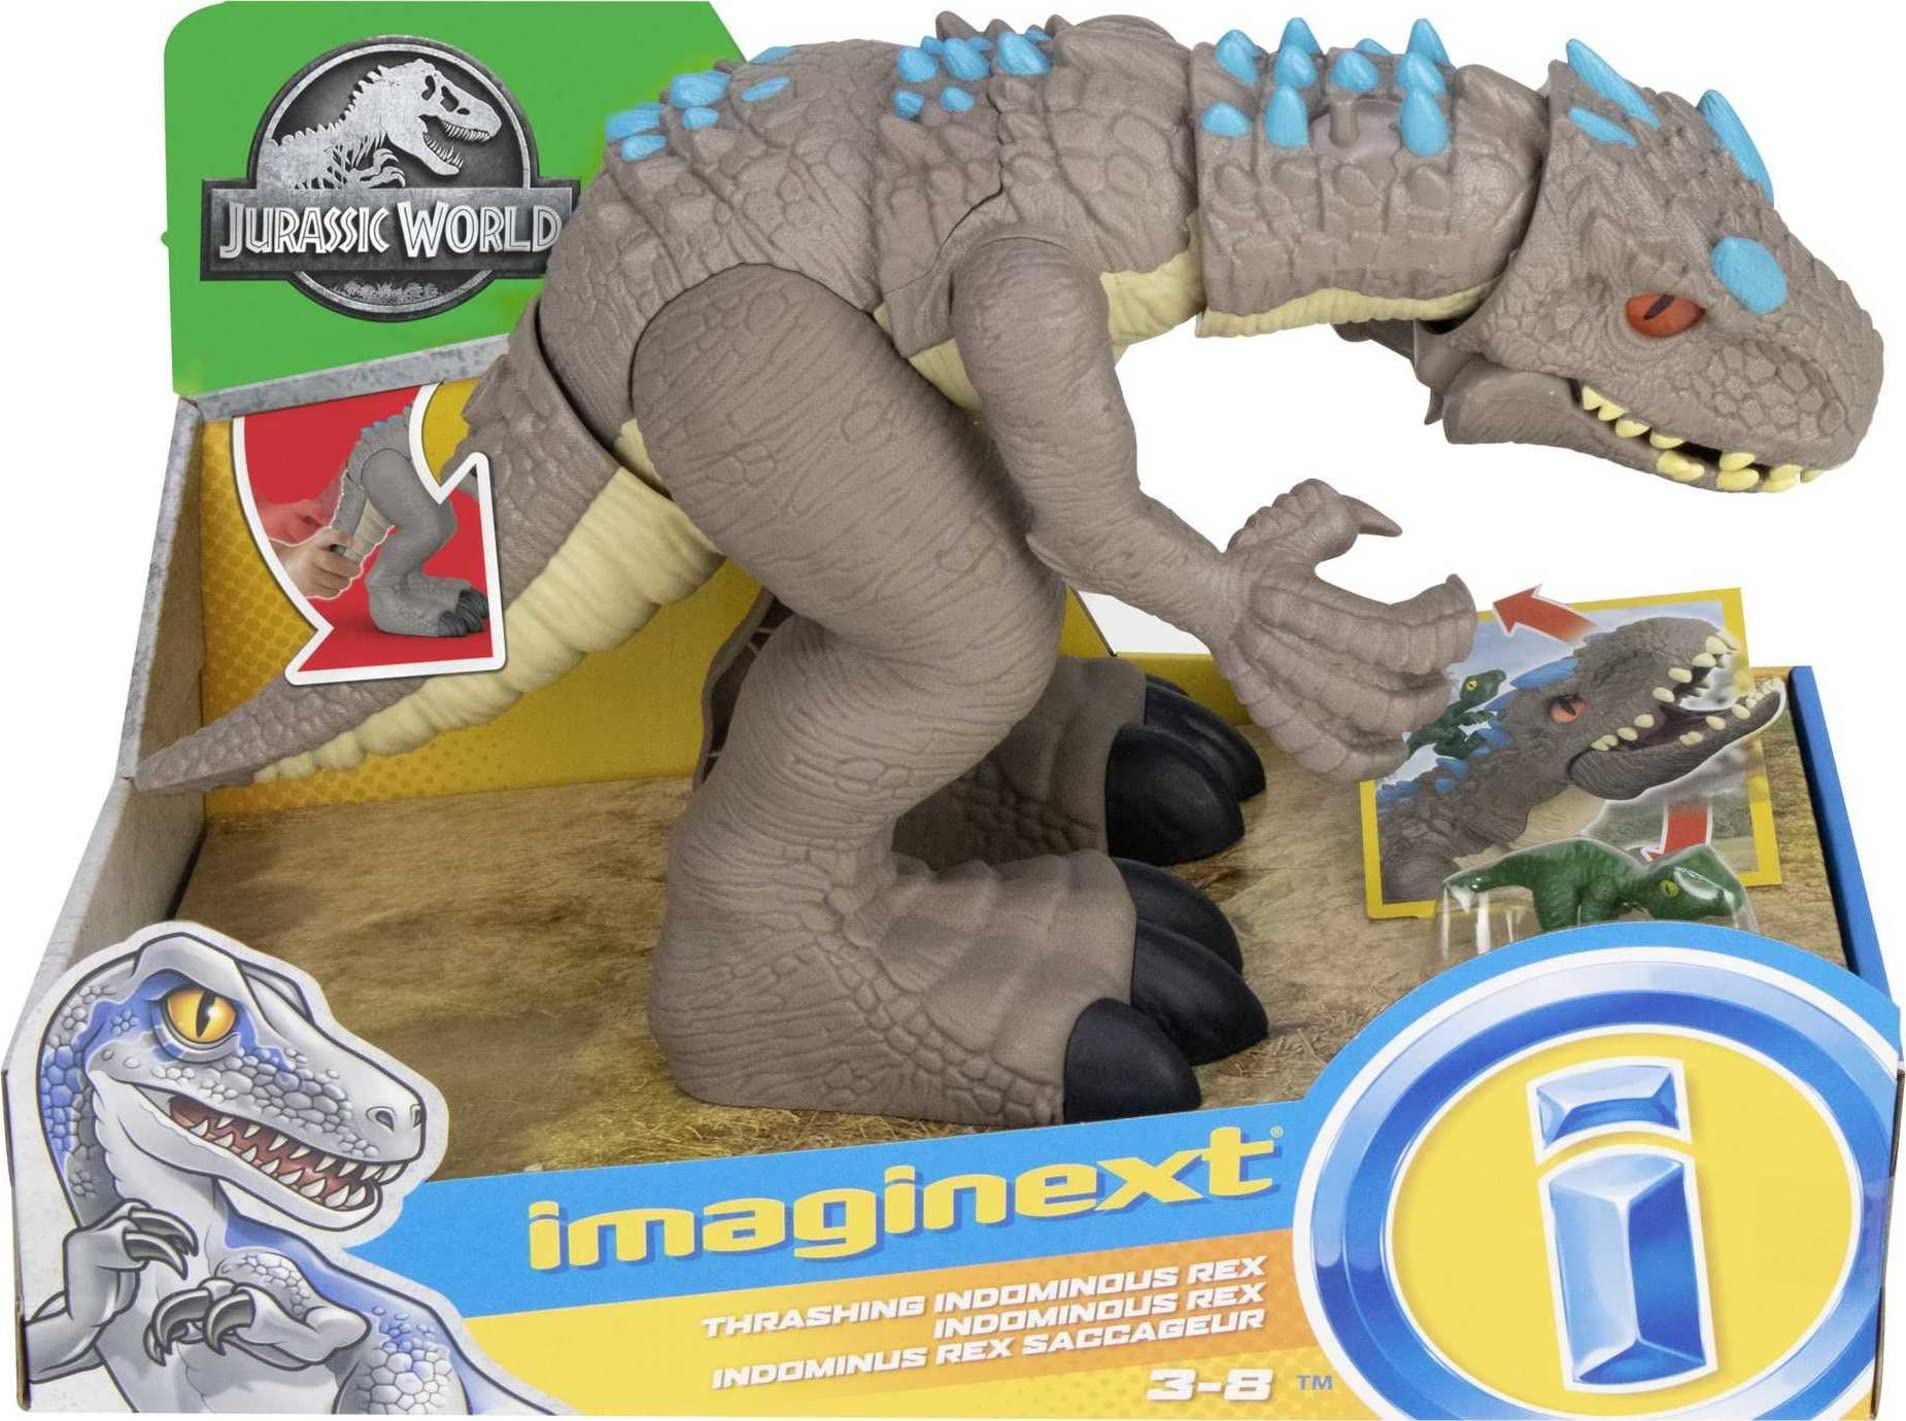 Jurassic World Toys Jurassic World Indominus Rex Dinosaur Toy with Thrashing Action & Raptor Figure for Pretend Play Ages 3+ Years